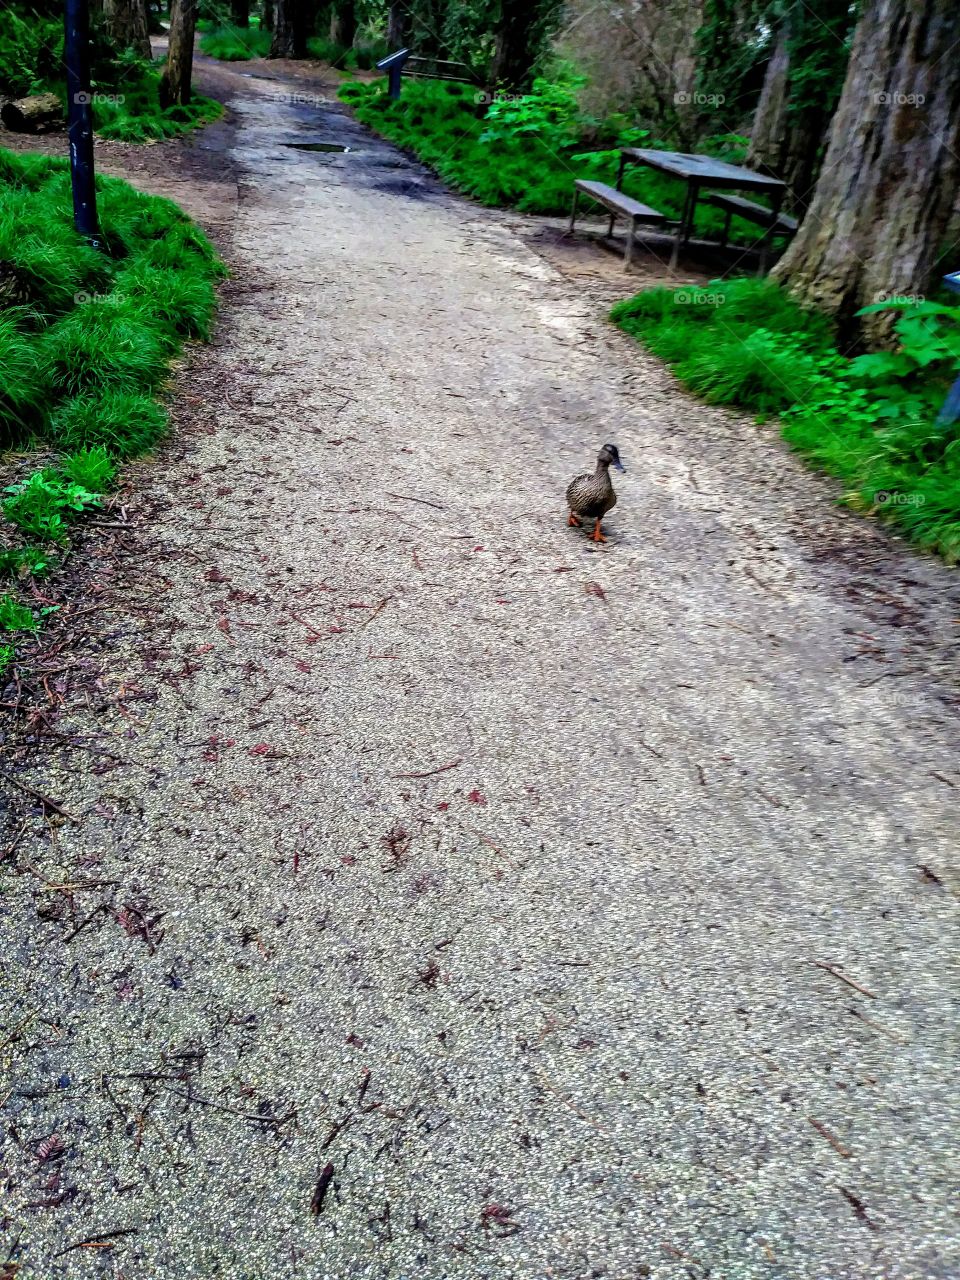 single female duck walking down gravel path amid redwoods and other green plants